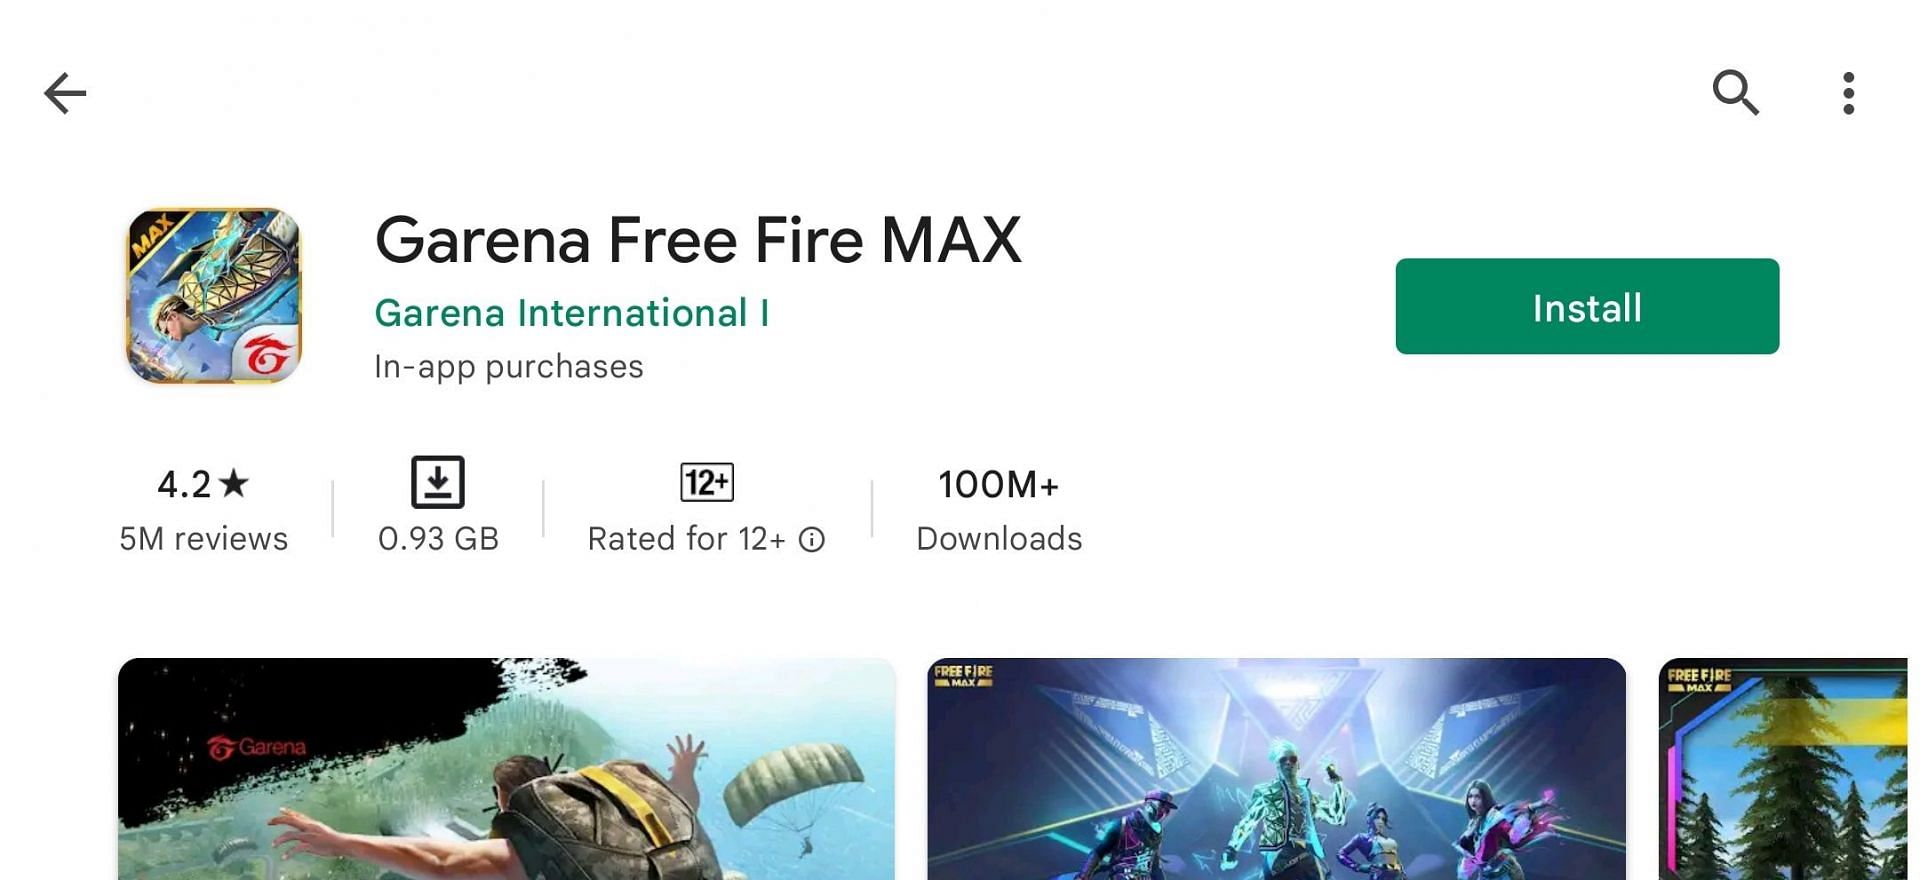 Free Fire Max on the Android store (Image via Google Play Store)